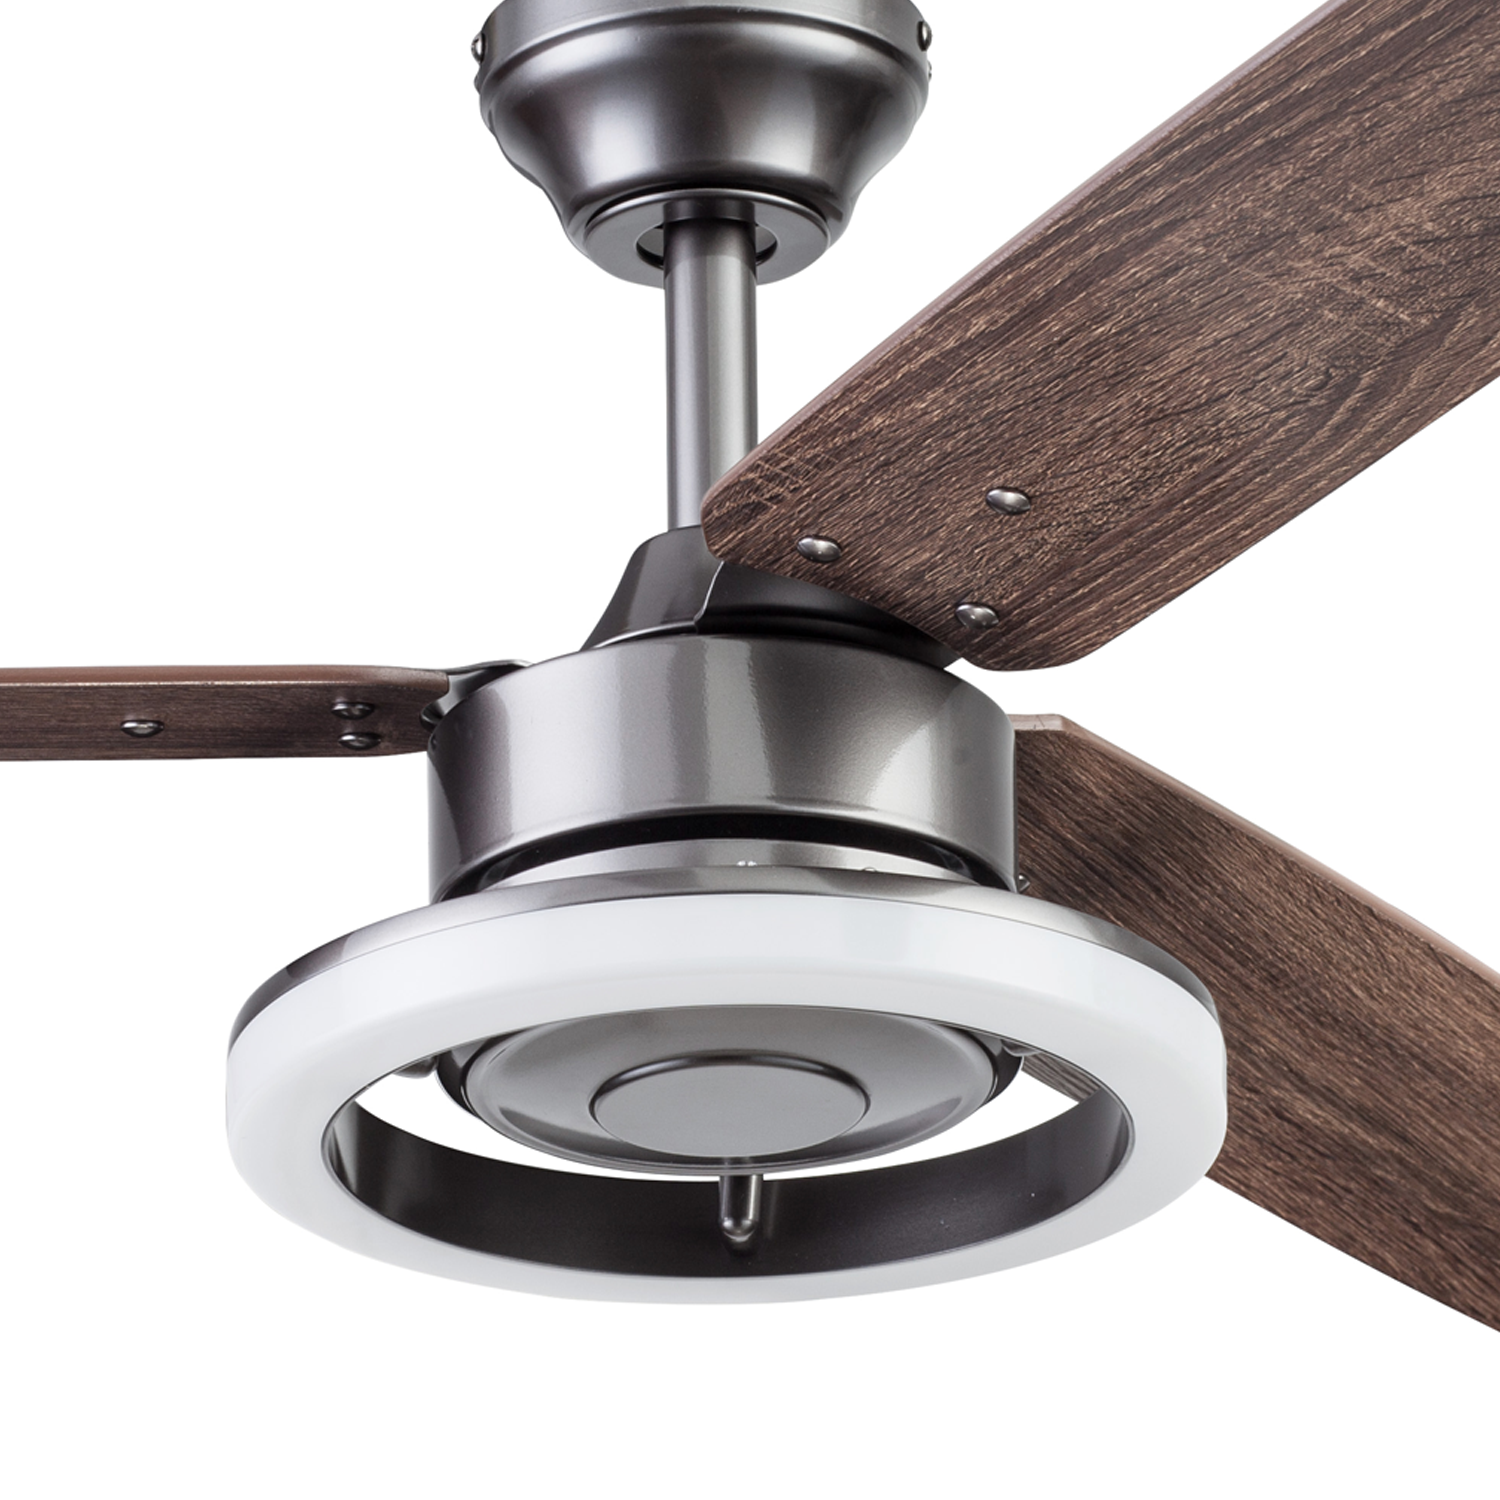 52 Inch Orbis, Gun Metal, Remote Control, Ceiling Fan by Prominence Home